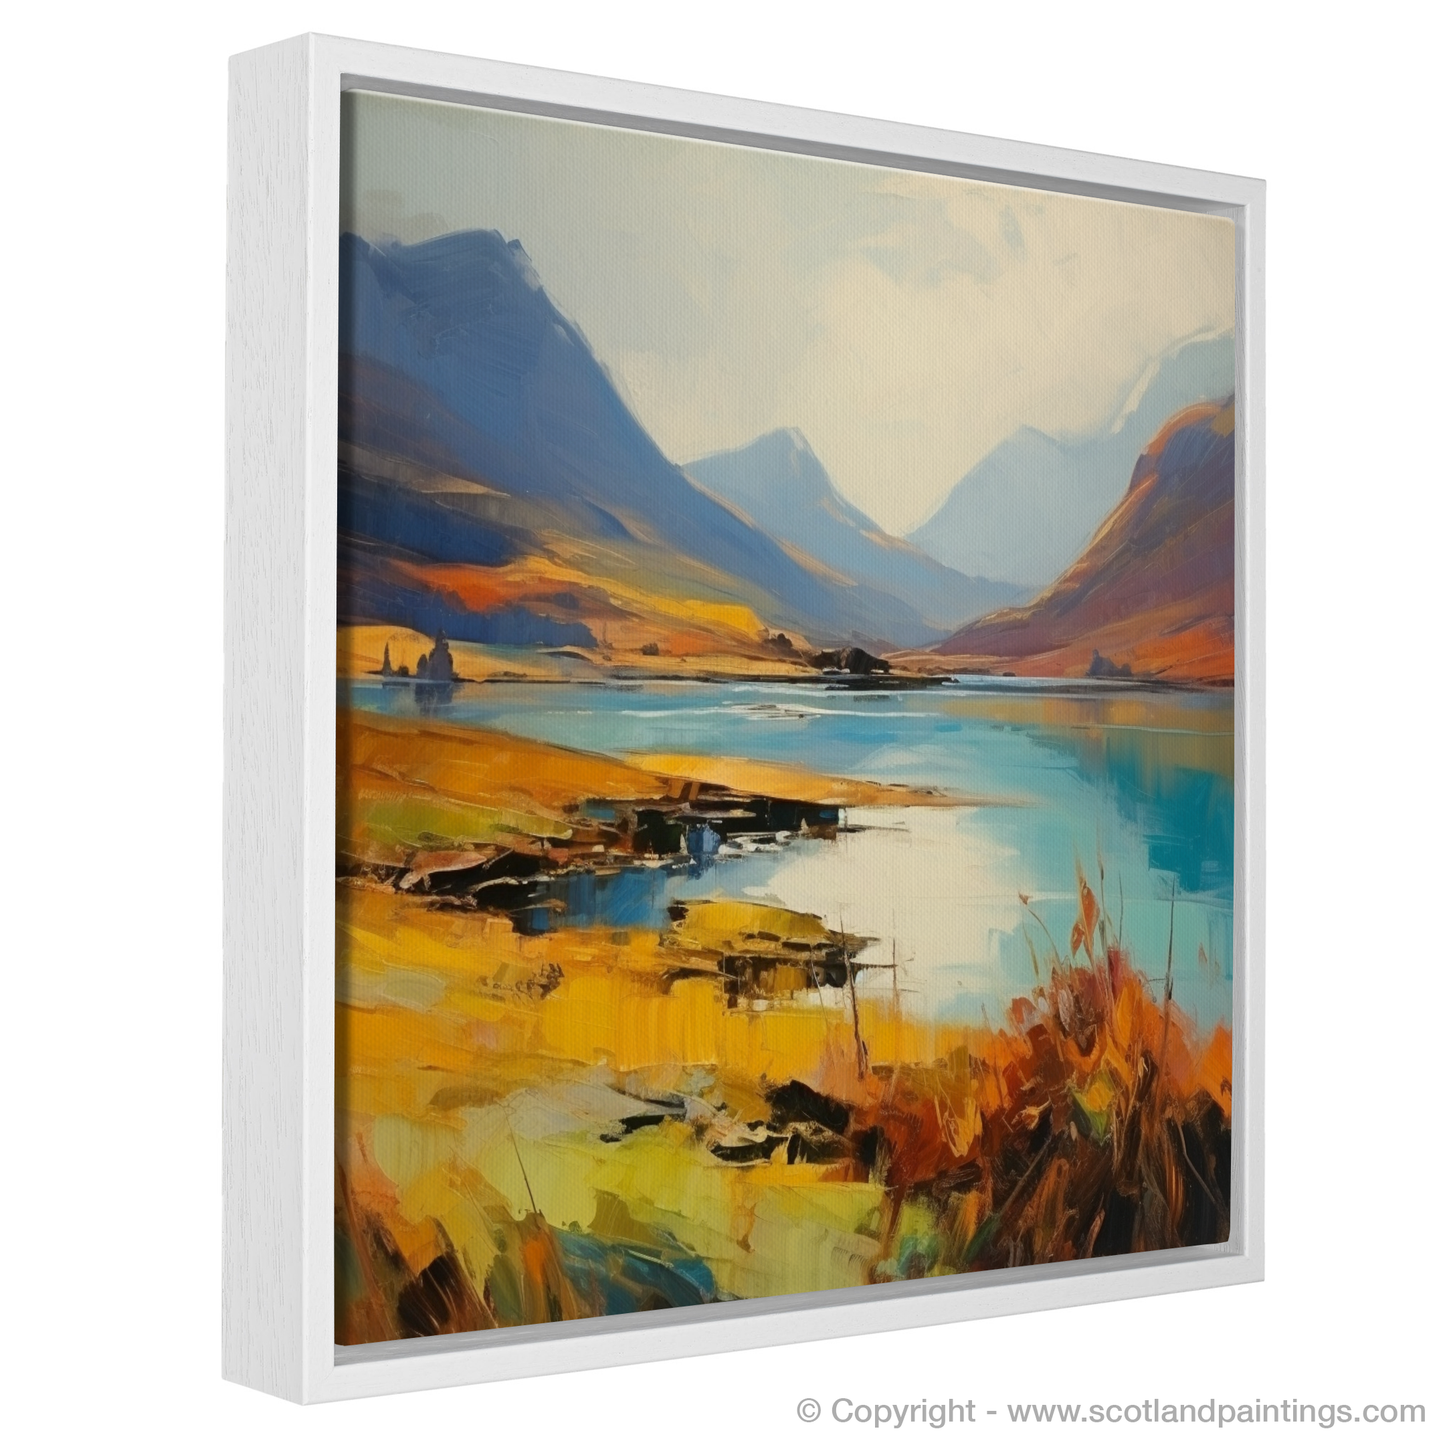 Highland Serenity: A Color Field Tribute to Glen Falloch